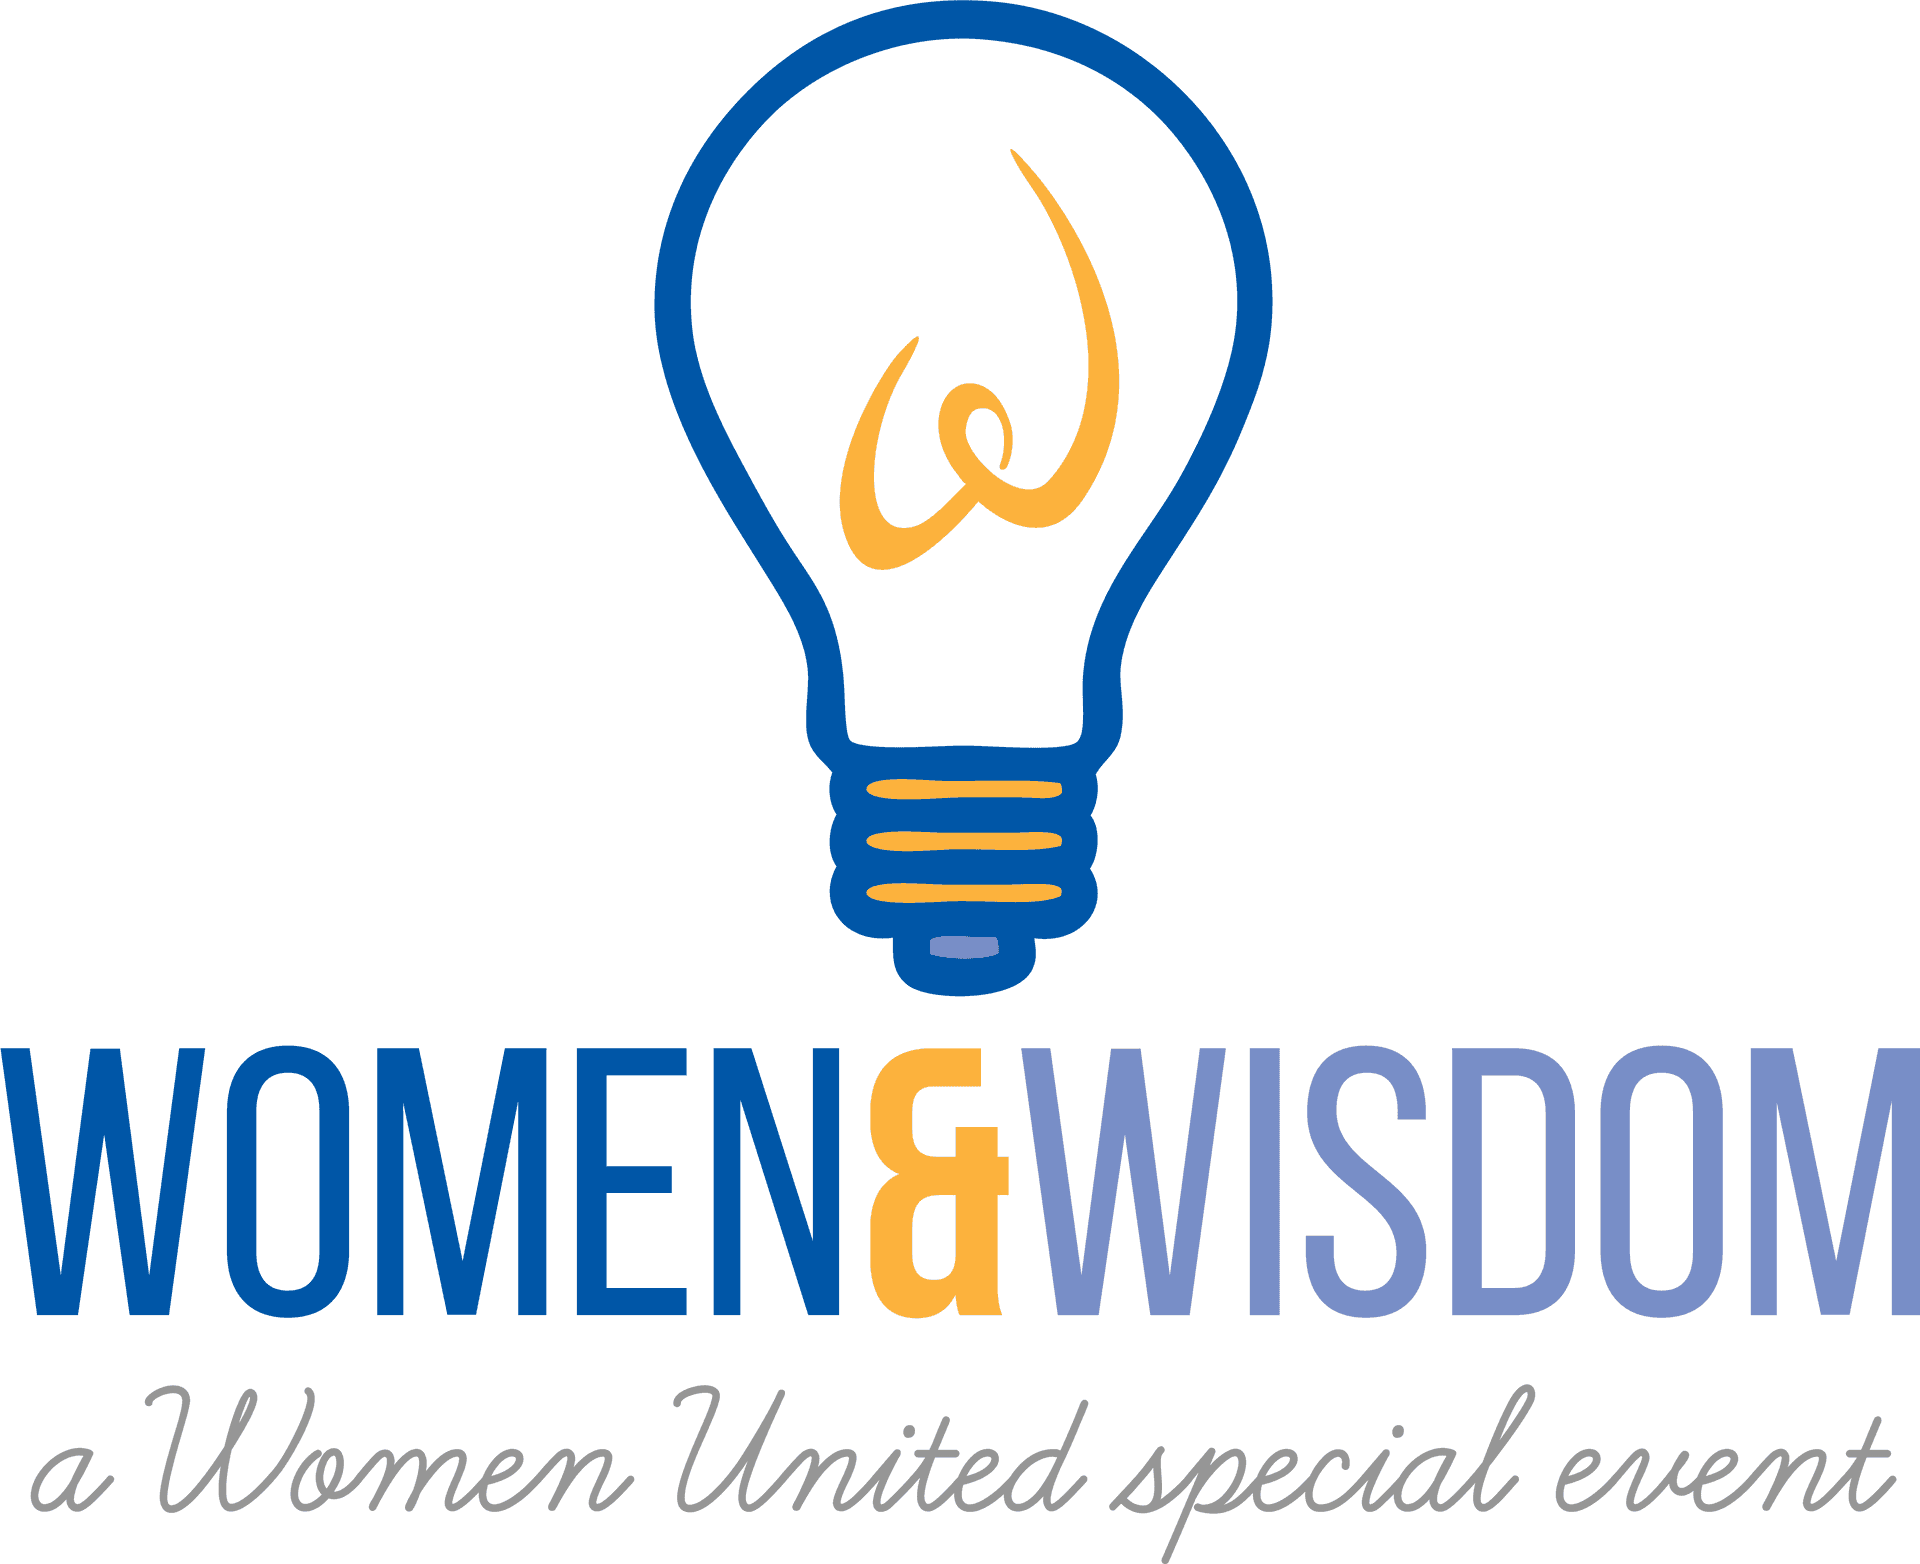 Womenand Wisdom Event Logo PNG image